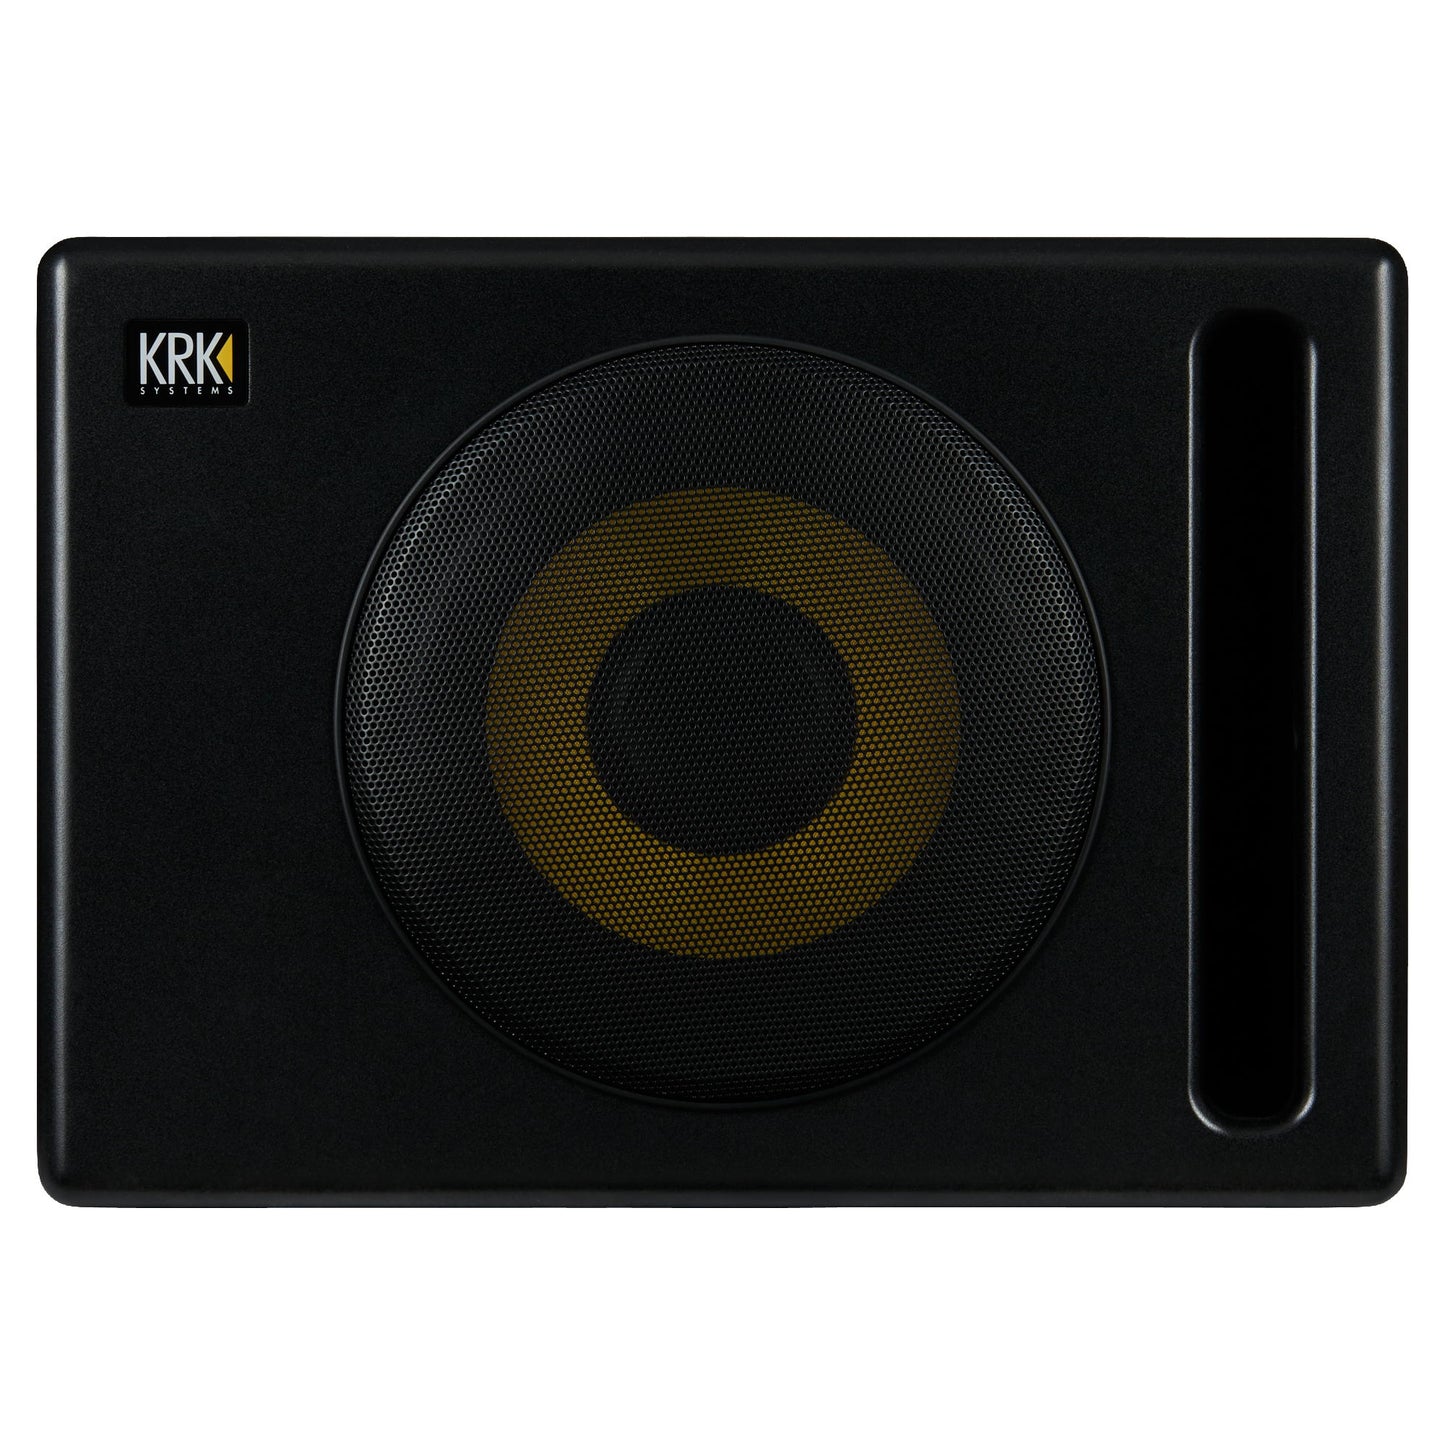 KRK S10.4 Powered Studio Subwoofer - with Grille